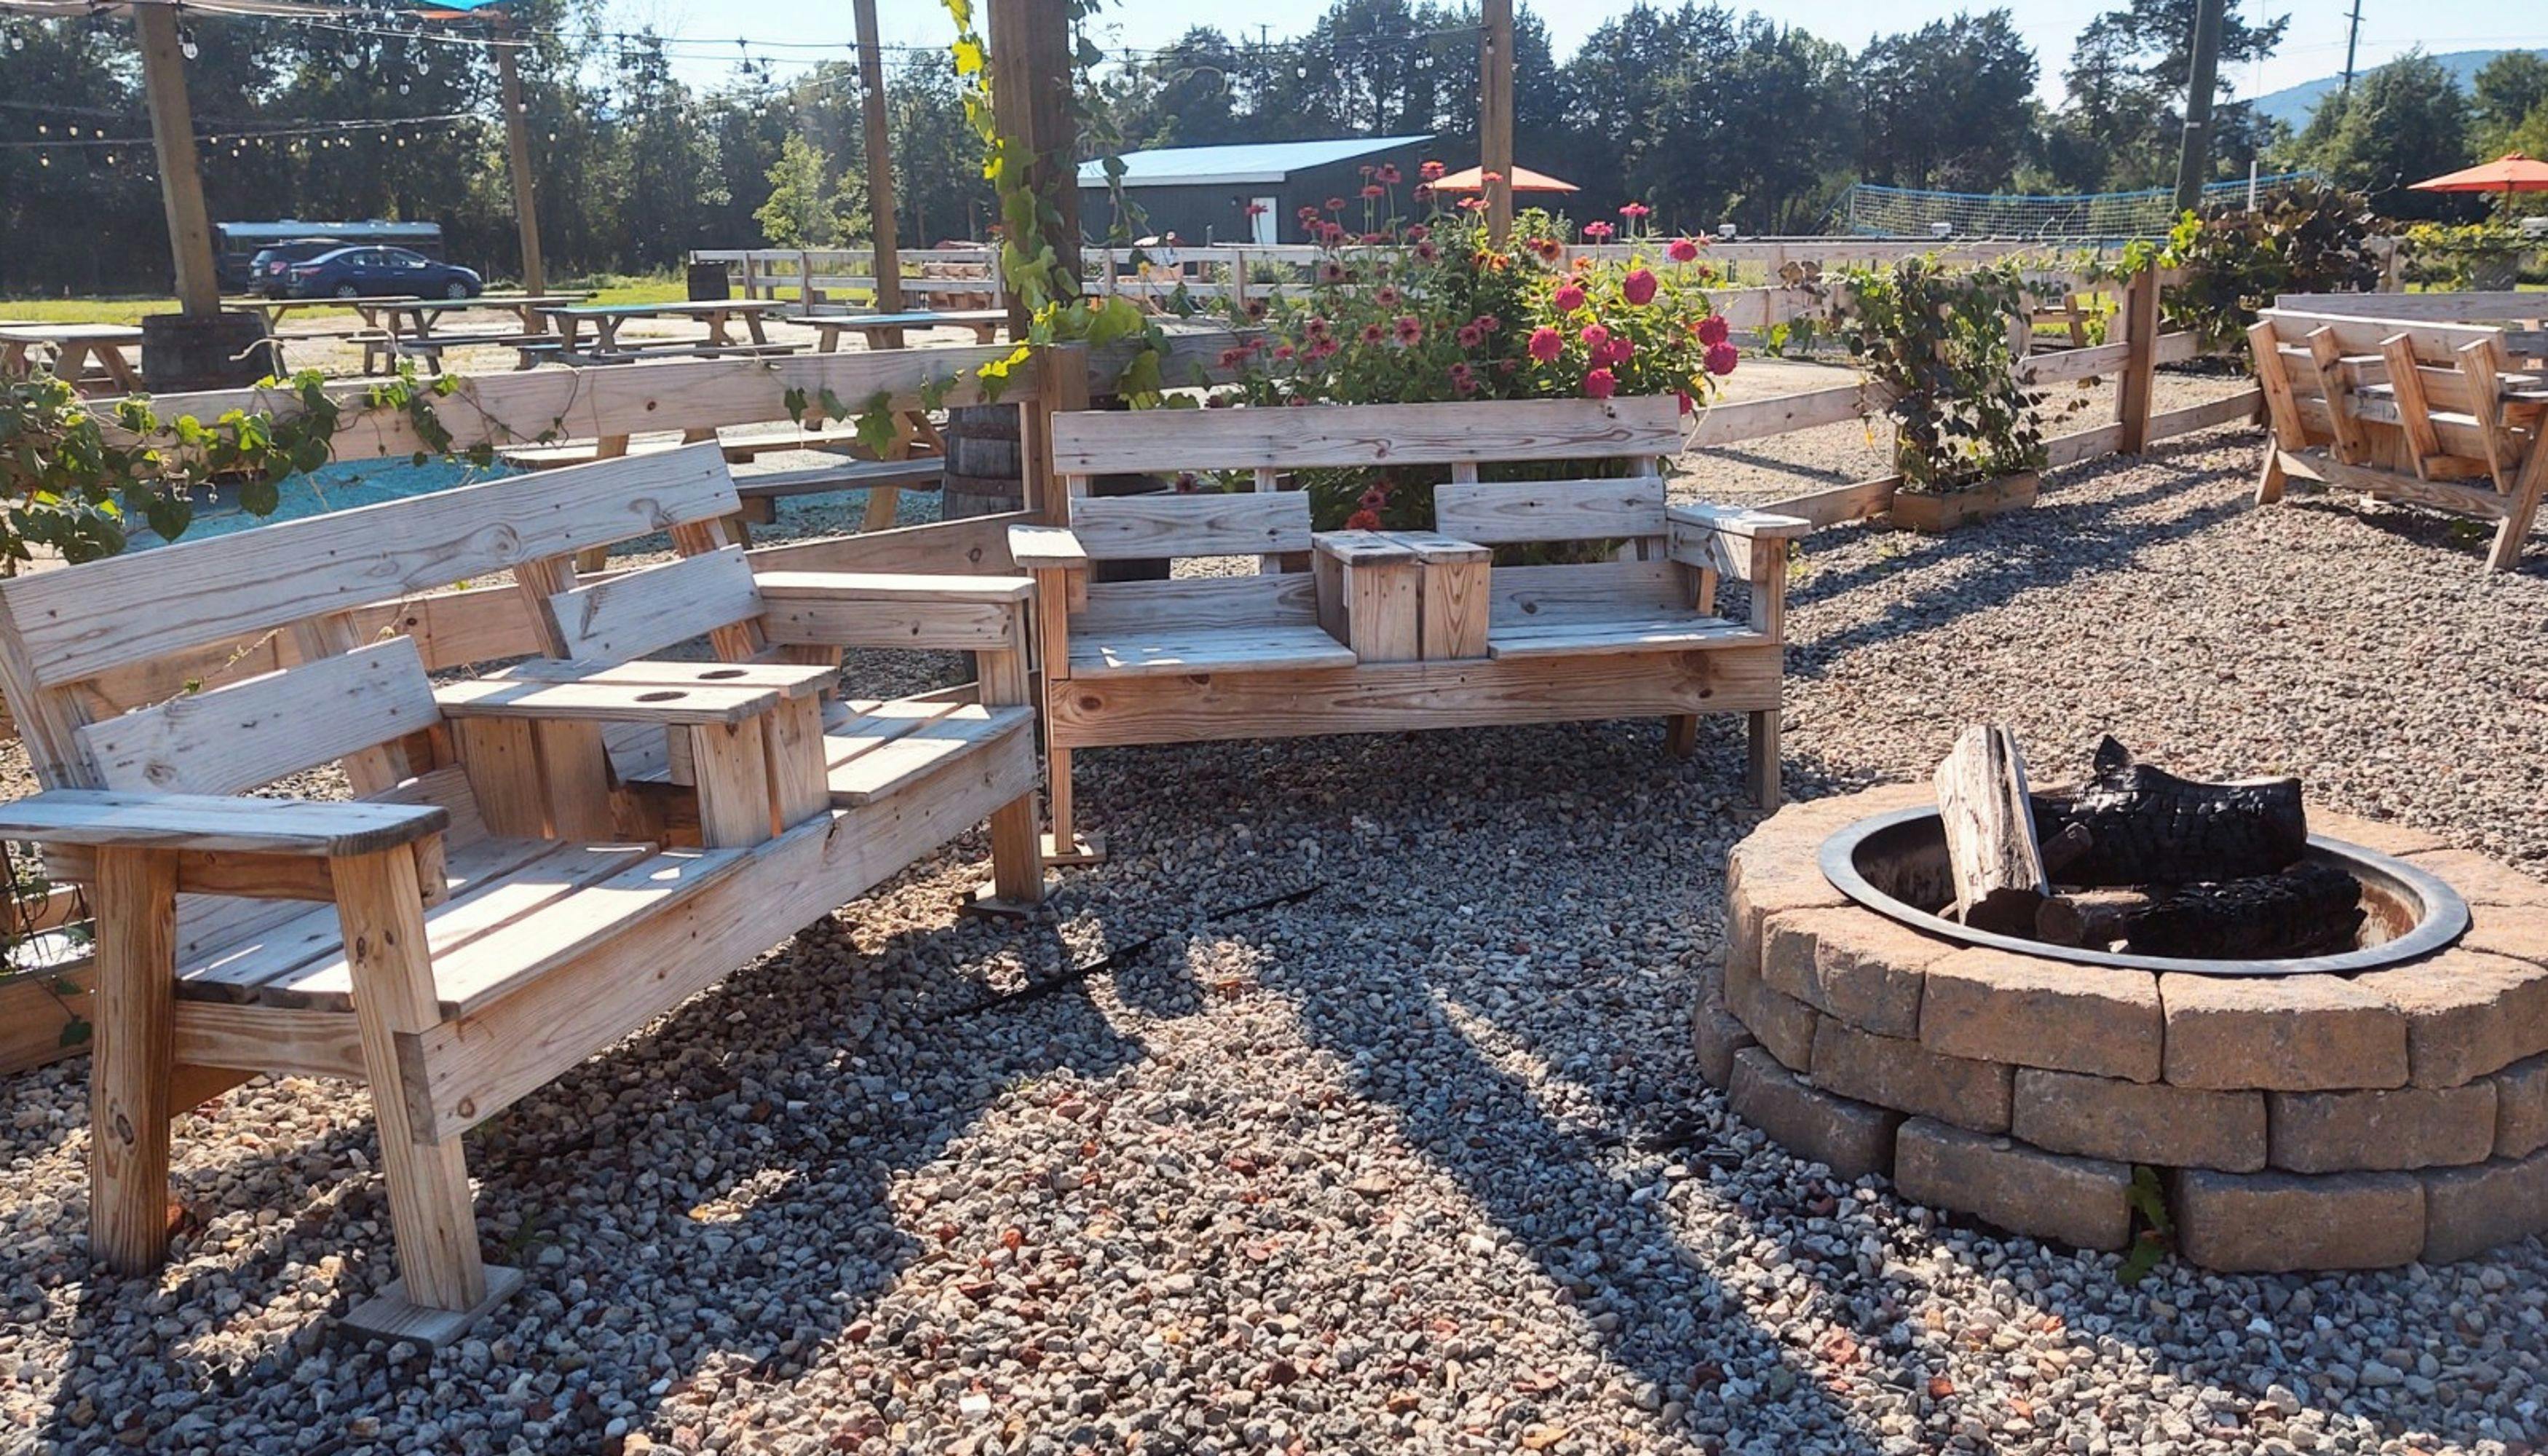 Expansive Beer Garden with firepits